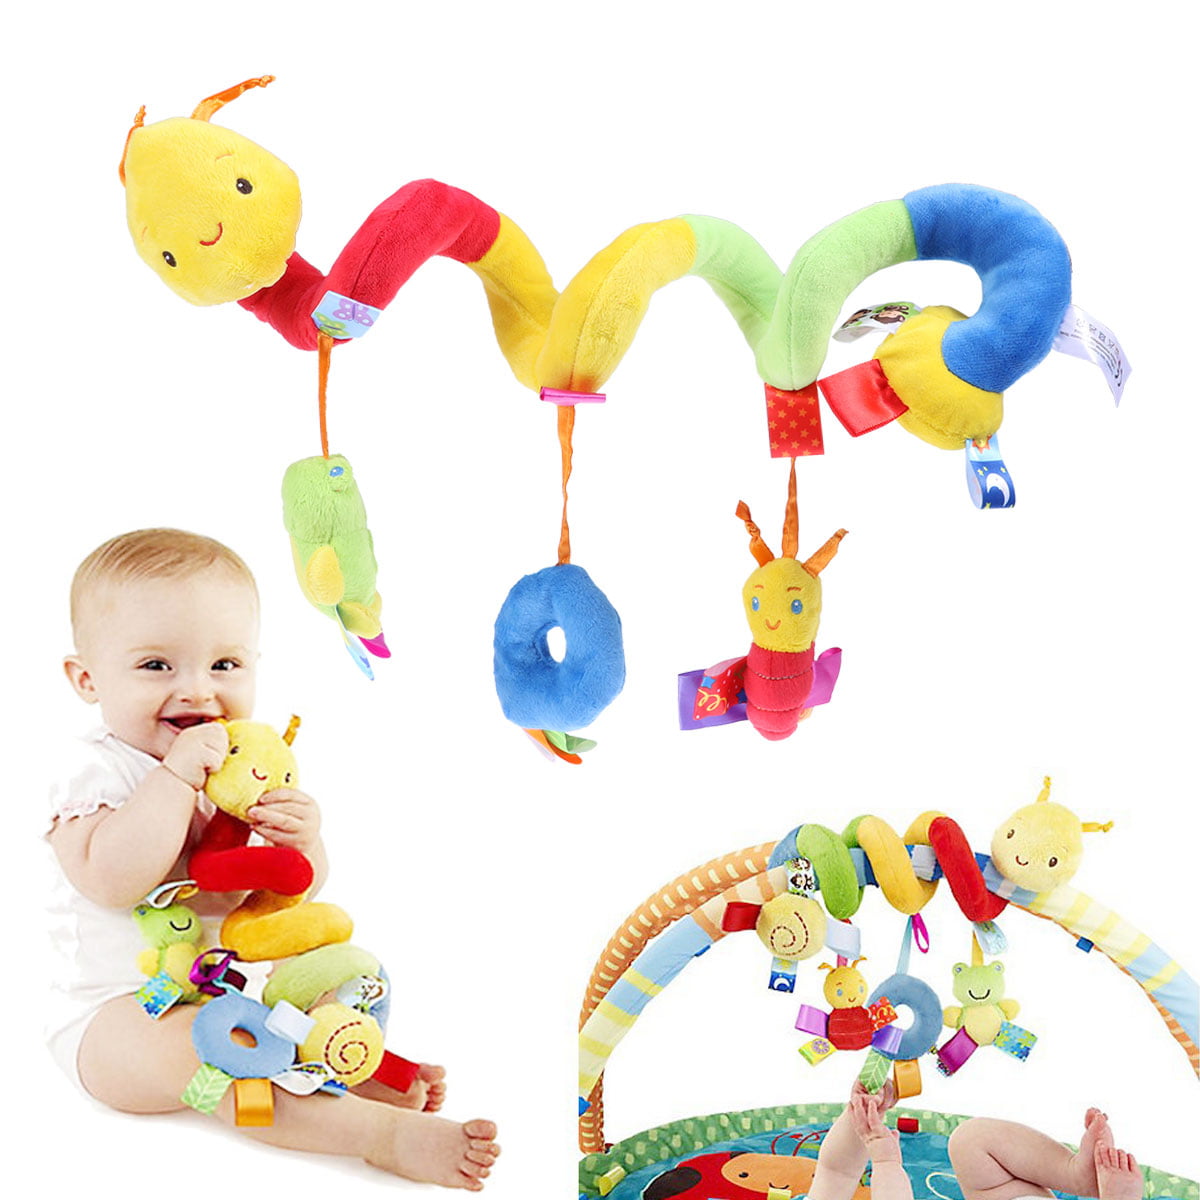 Hanging Stuffed Rattle Toddler Toys BSTiltion Baby Spiral Activity Hanging Toys Stroller Toys with Ringing Bell Car Seat Bed Hanging Toys Cart Seat Pram Toys Crib Bed Worm Stuffed Toy